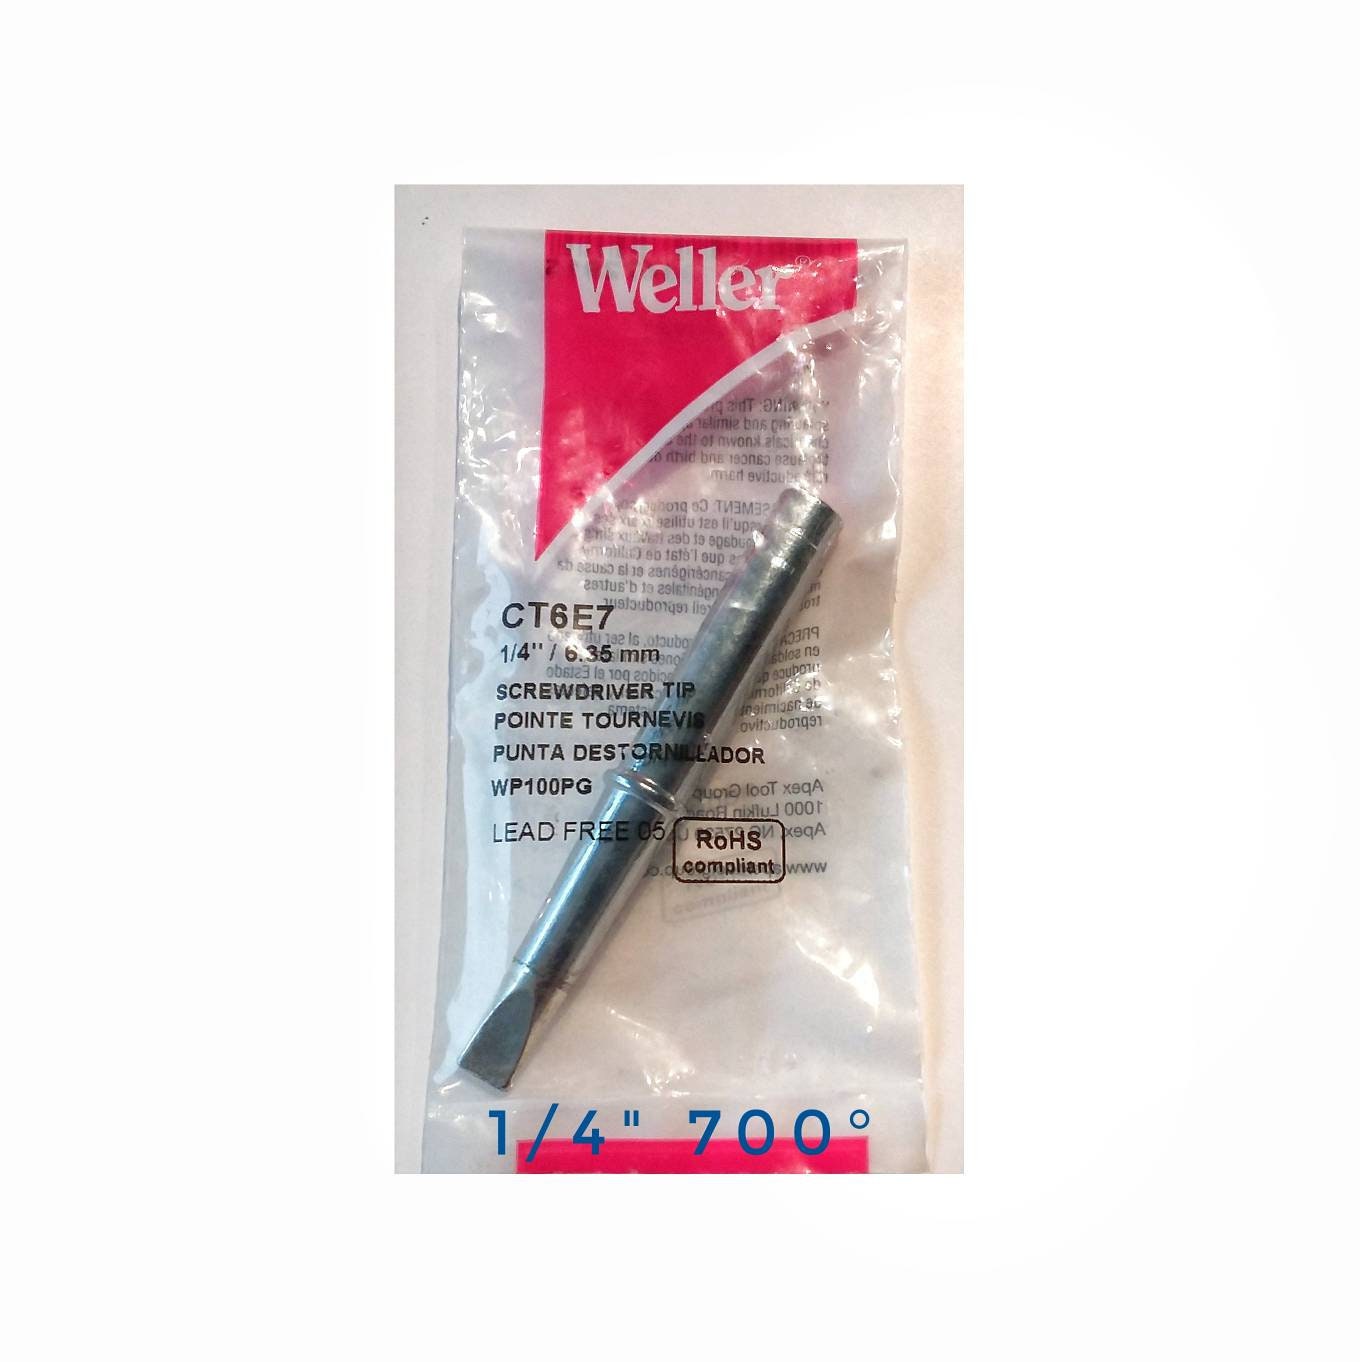 Soldering Iron Tip for Stained Glass, Jewelry Making, Wire or Metal Art Built-in temperature control 1/4" for Weller 100PG Iron.